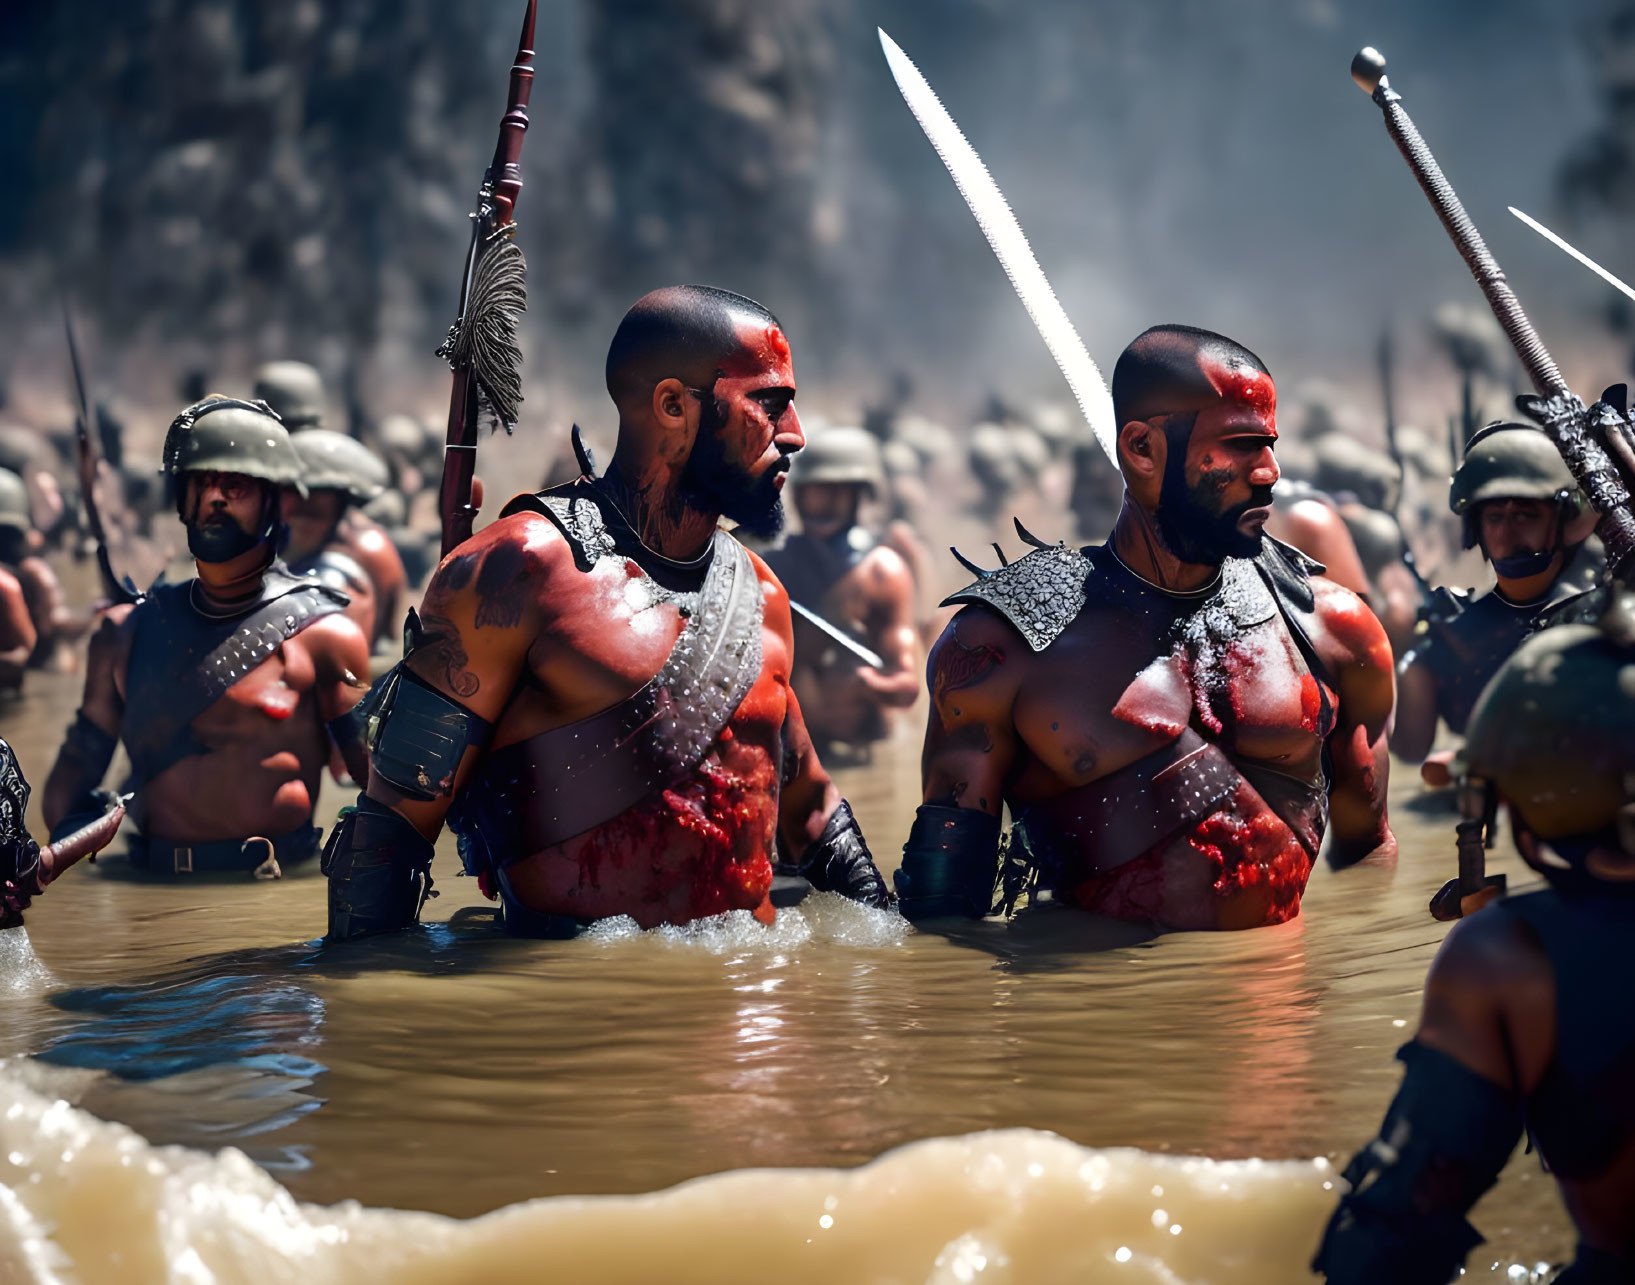 Battle scene: Warriors wading with spears in water.